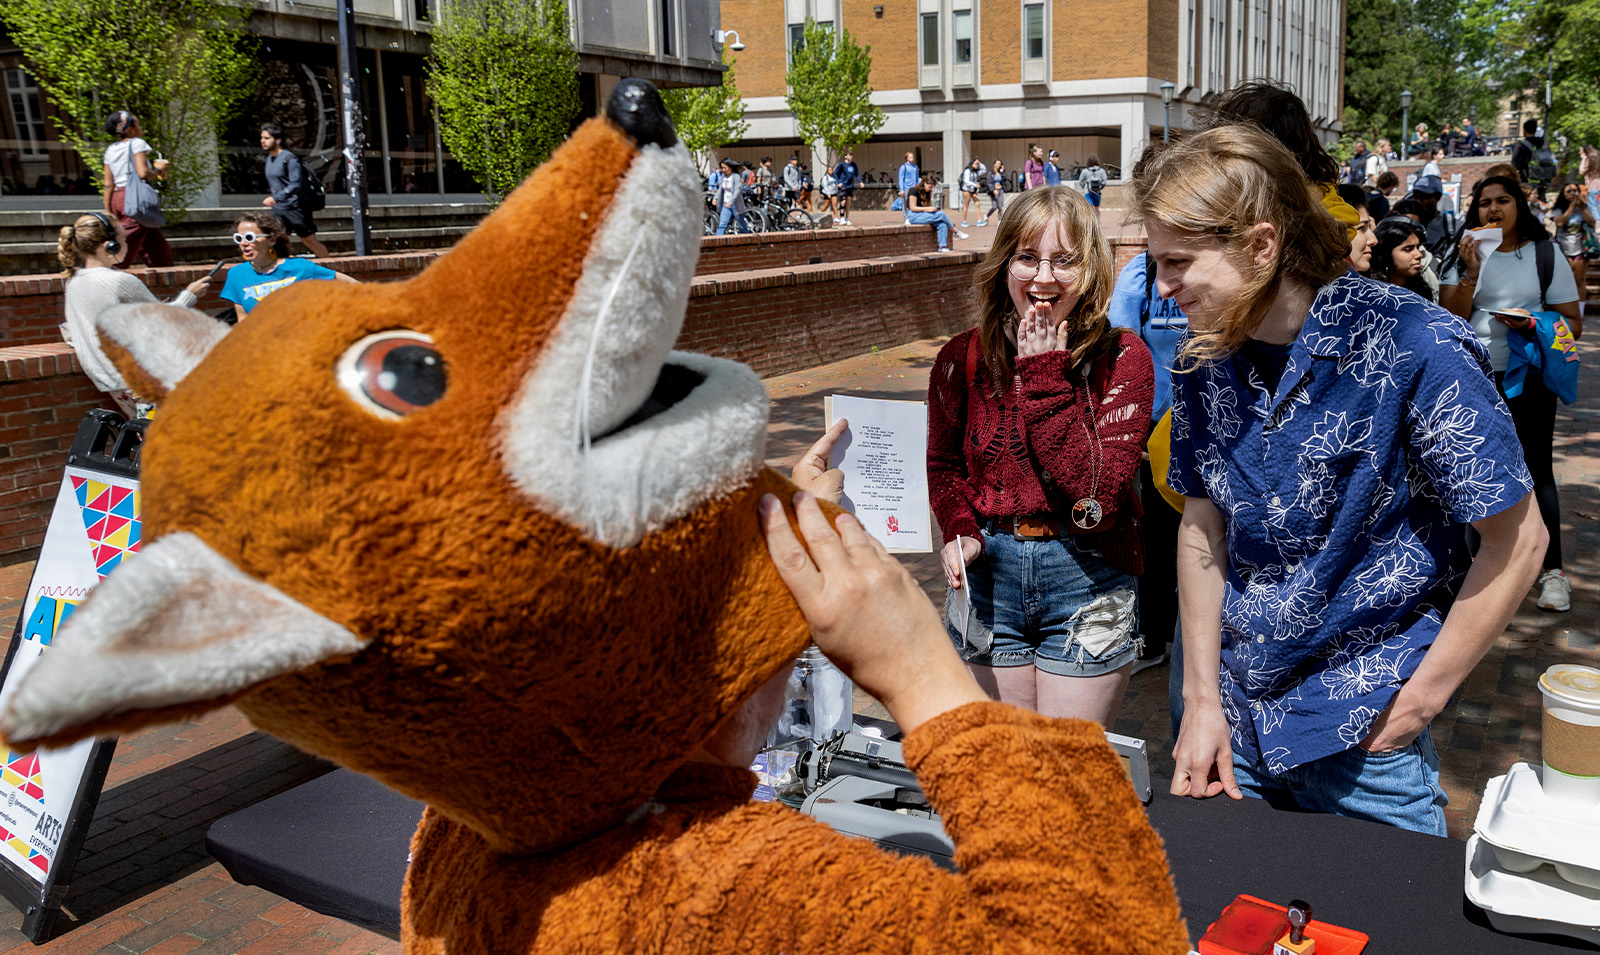 A man in a fox costume, known as the poetry fox, reading a poem he wrote to people standing in line.